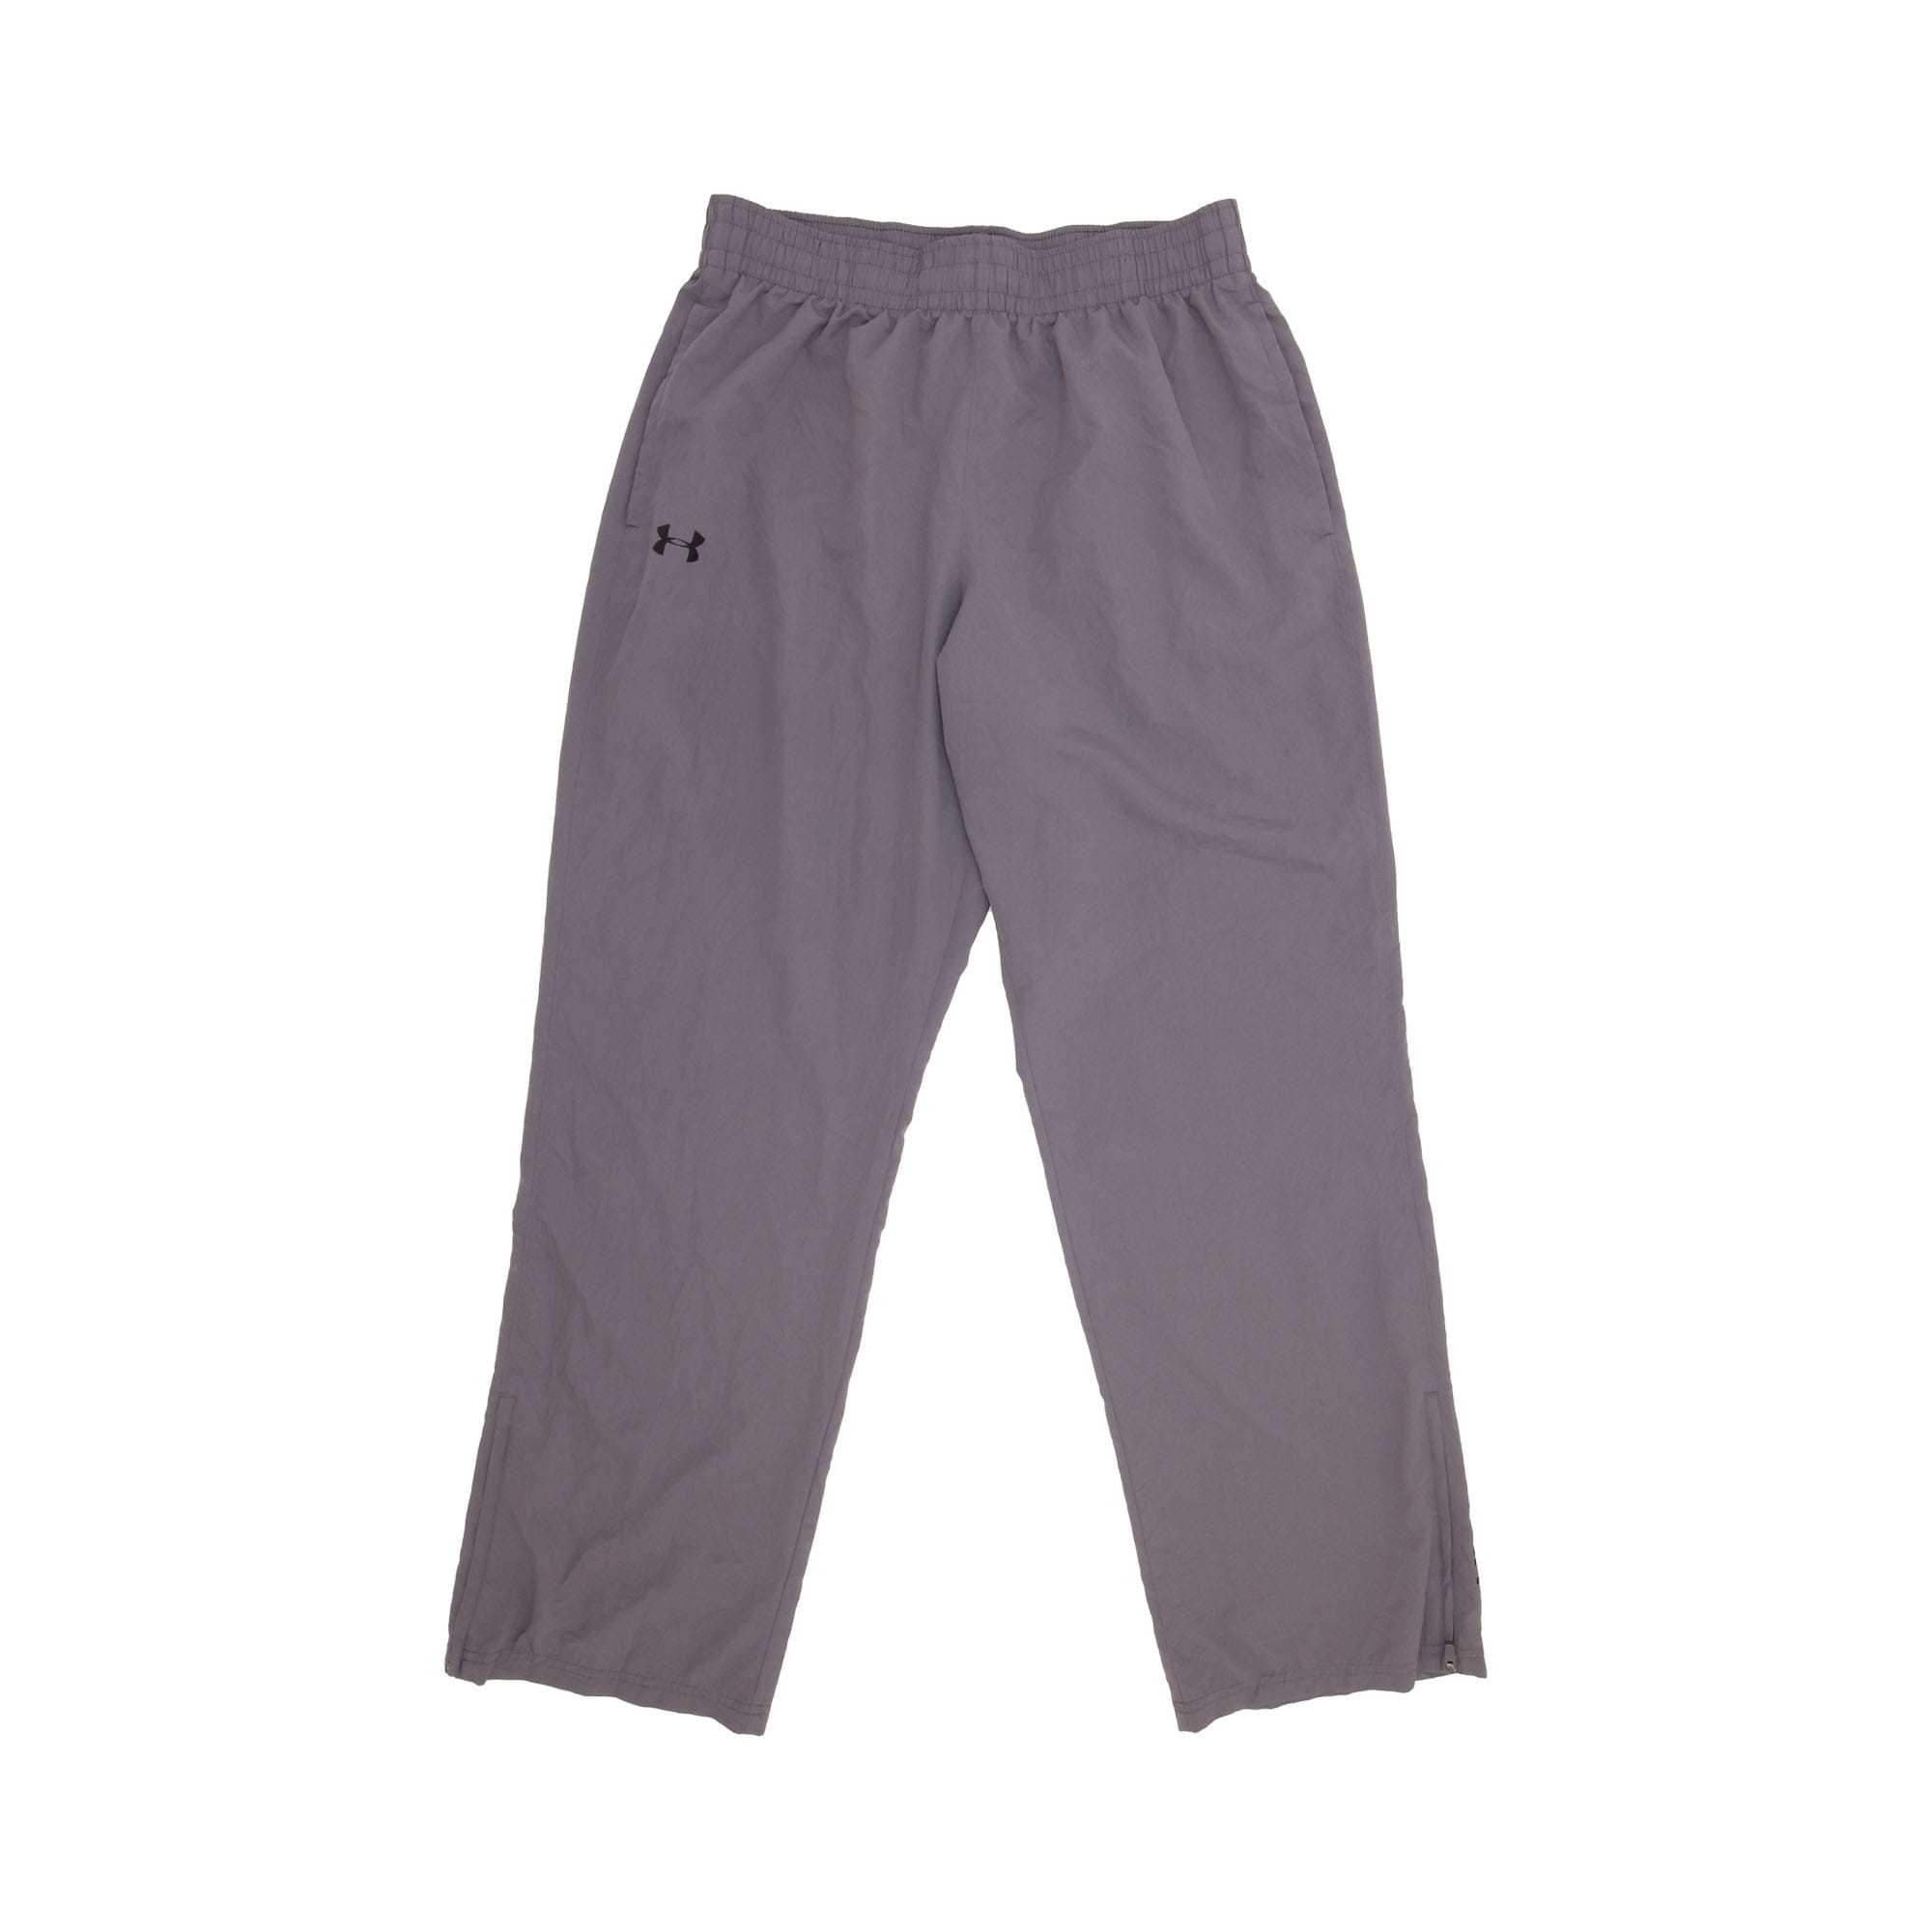 Under Armour Track Pants Grey -  L